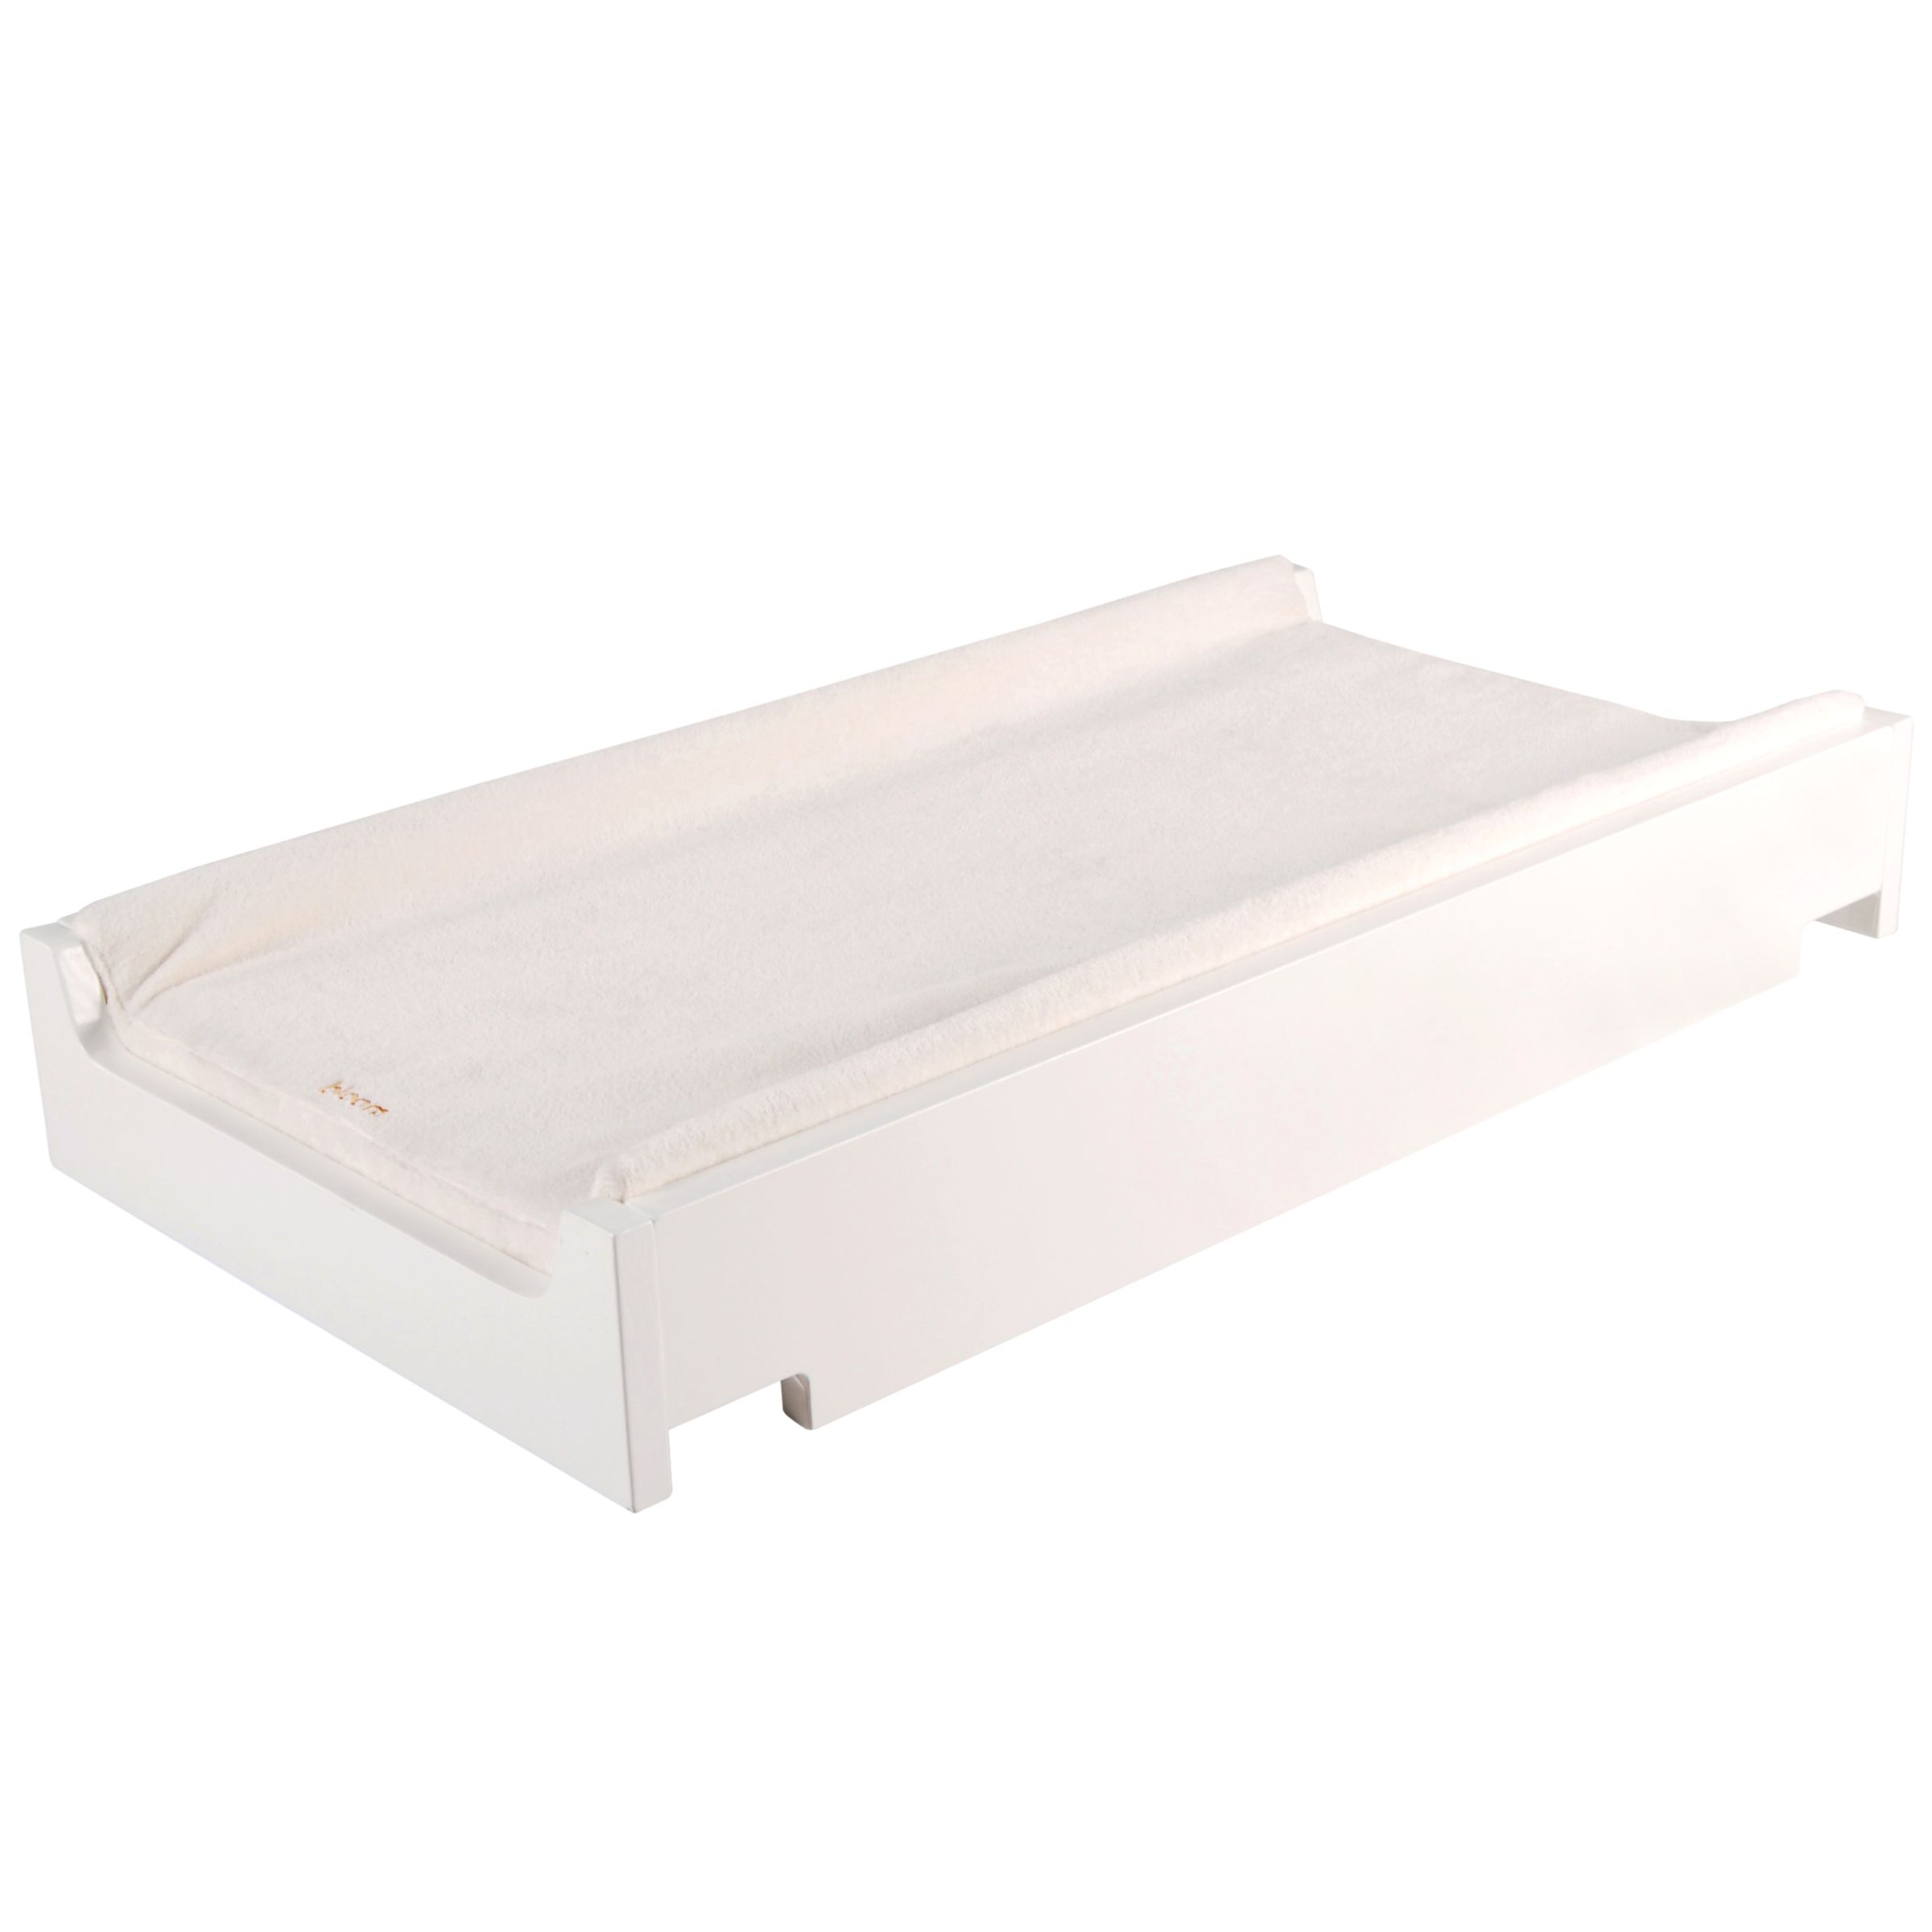 Bloom Luxo Change Tray Coconut White At John Lewis Partners